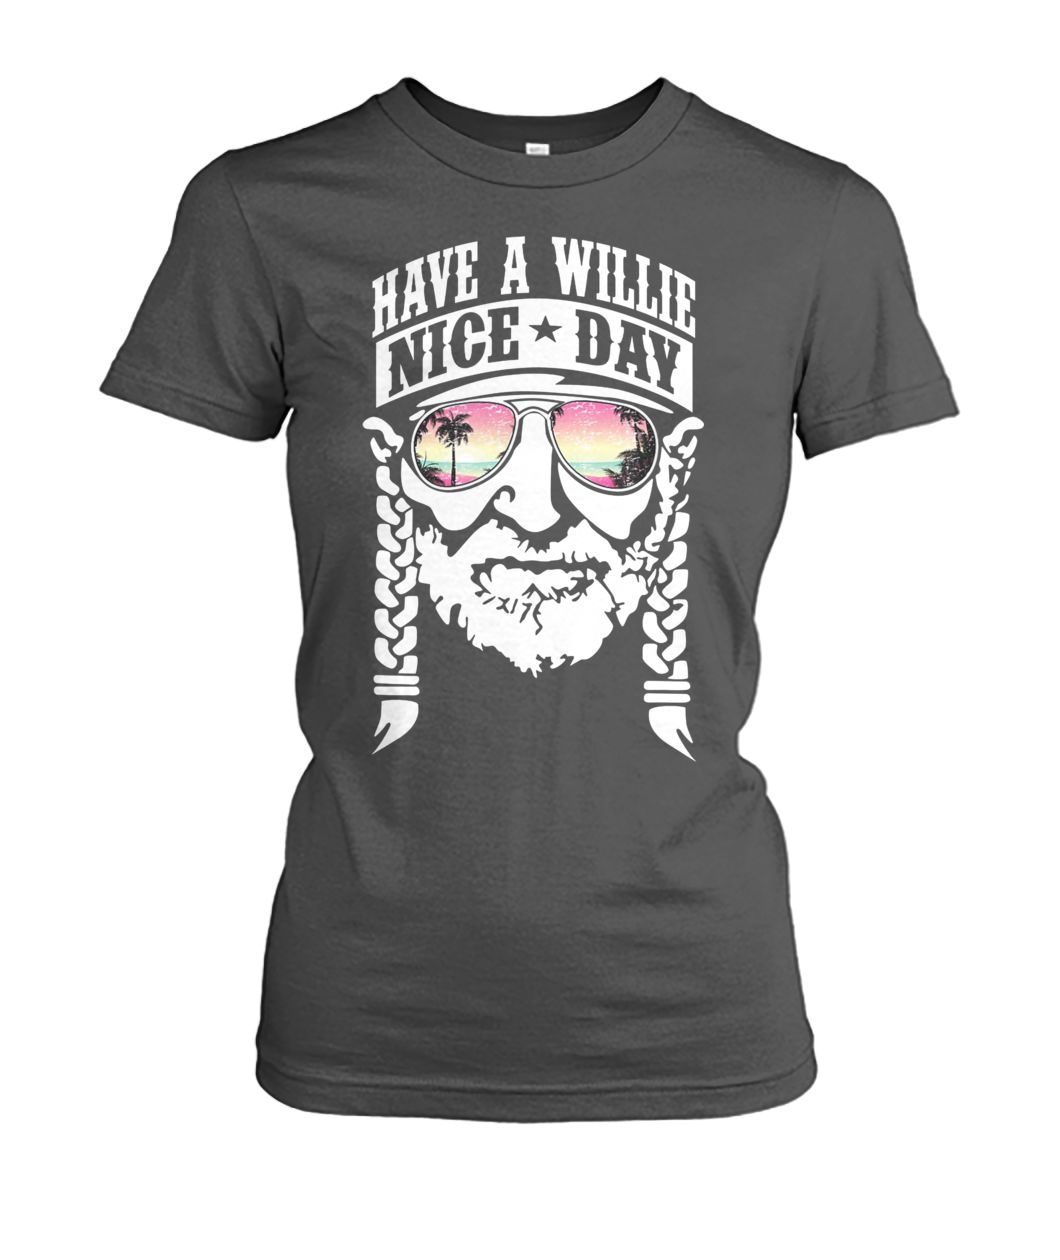 Have a willie nice day willie nelson women's crew tee